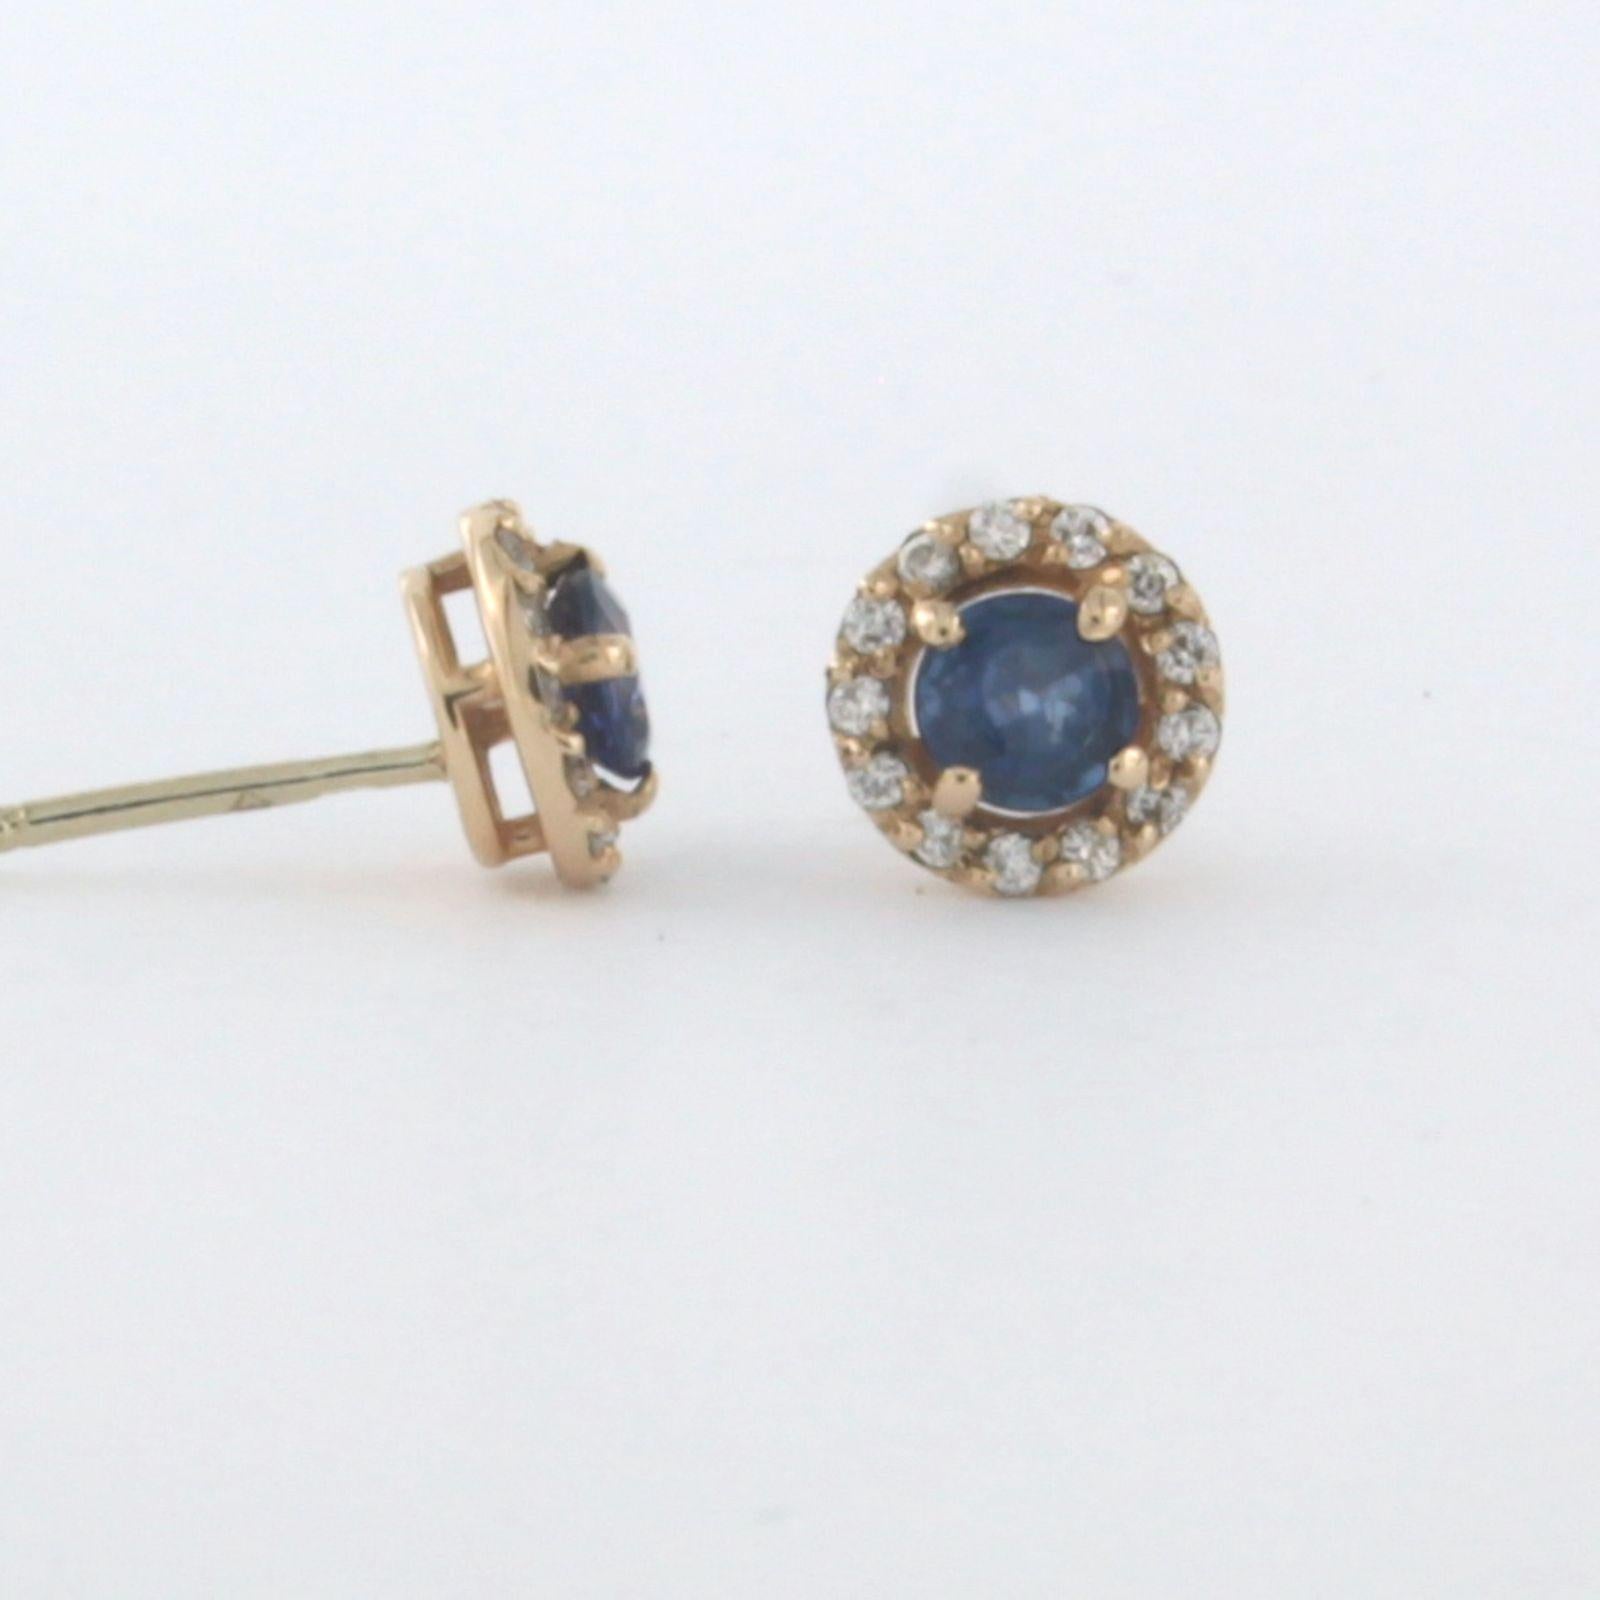 14k rose gold entourage stud earrings set with sapphire up to. 0.56 ct and brilliant cut diamonds up to. 0.14ct - G/H - VS/SI

detailed description:

the top of the ear stud has a diameter of 7.0 mm wide

weight 1.6 grams

set with

- 2 x 4.0 mm